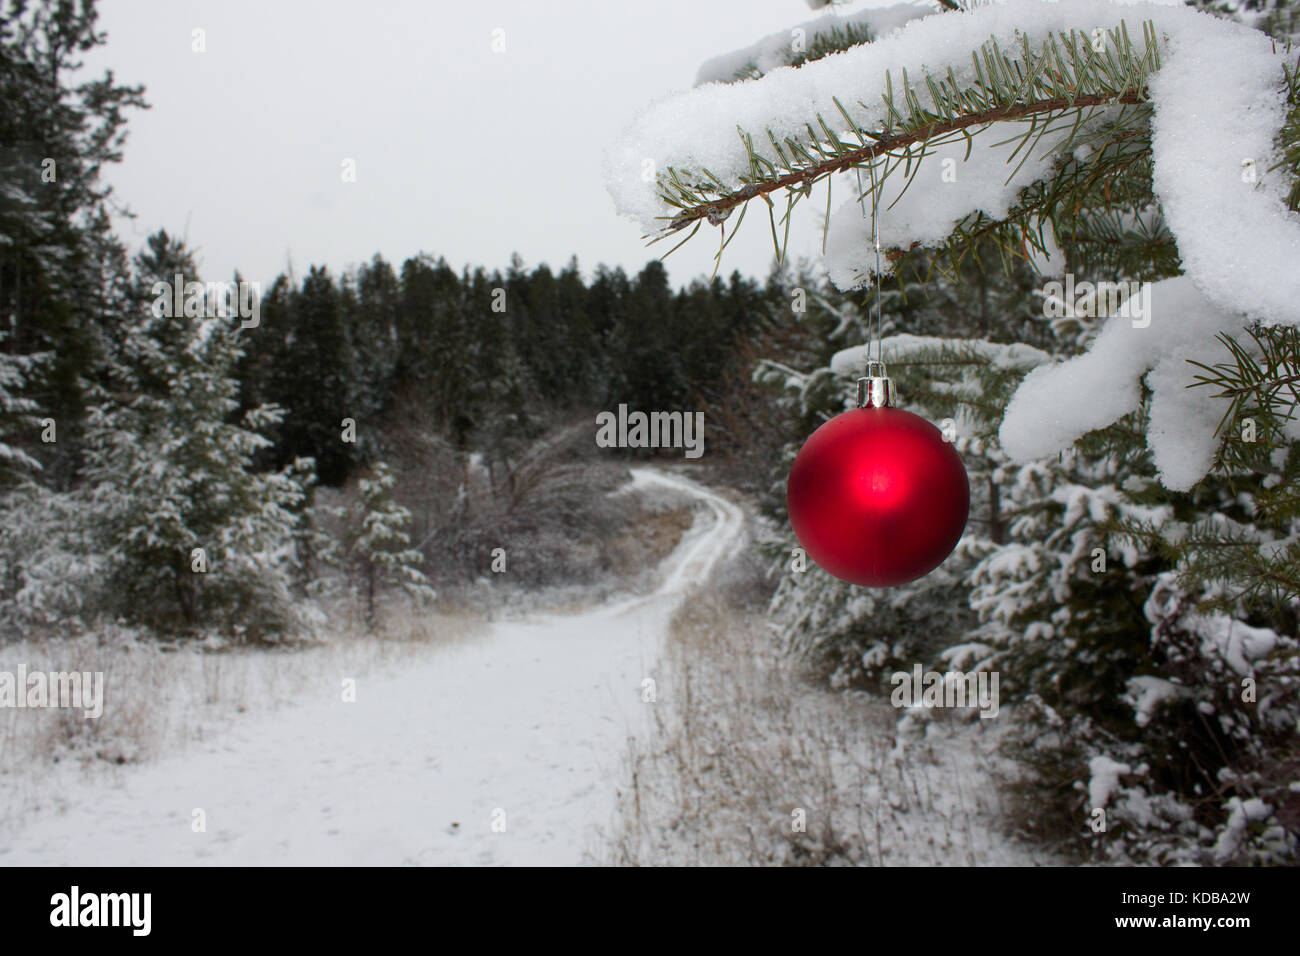 Red Christmas ornament hanging on snow covered branch of an evergreen tree Stock Photo